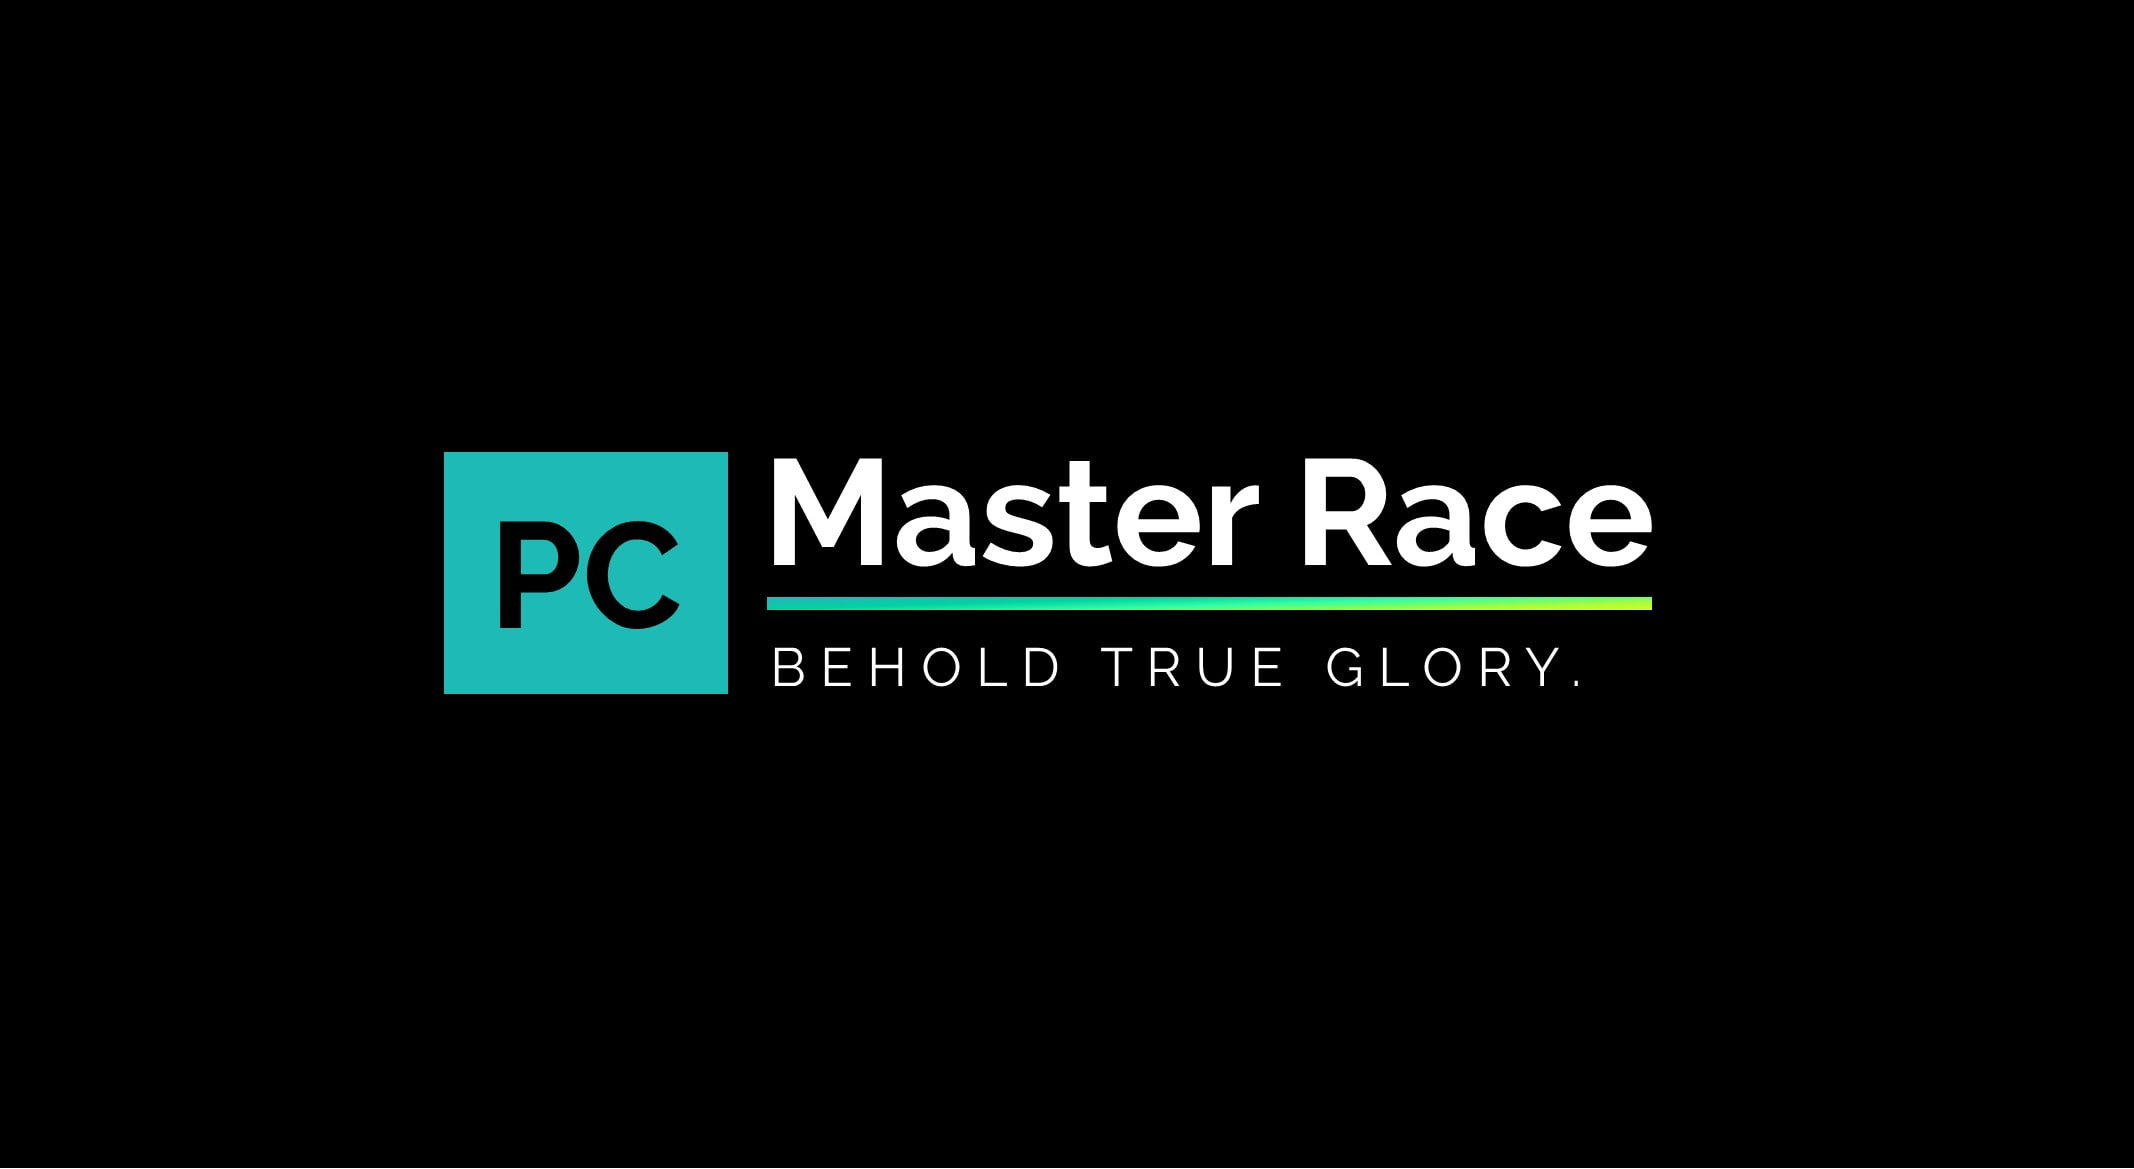 pc master race simple typography black background, text, communication